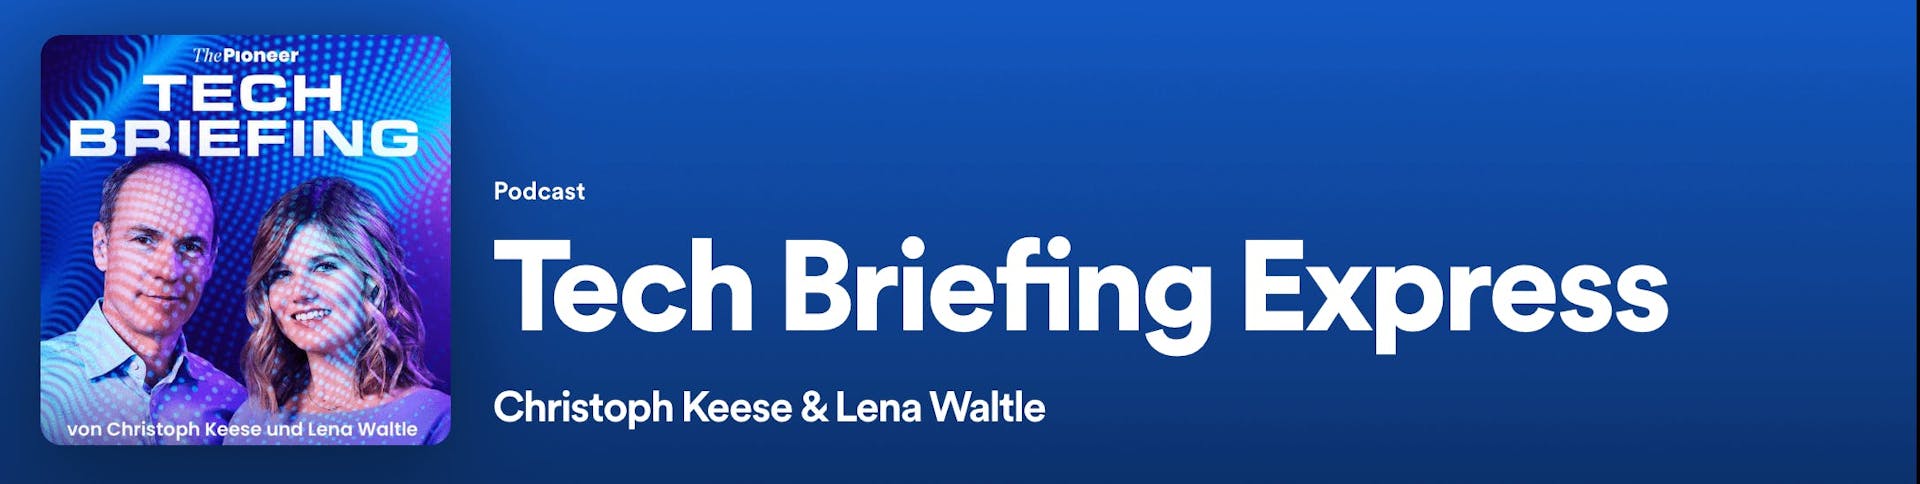 Tech Briefing Express Podcast